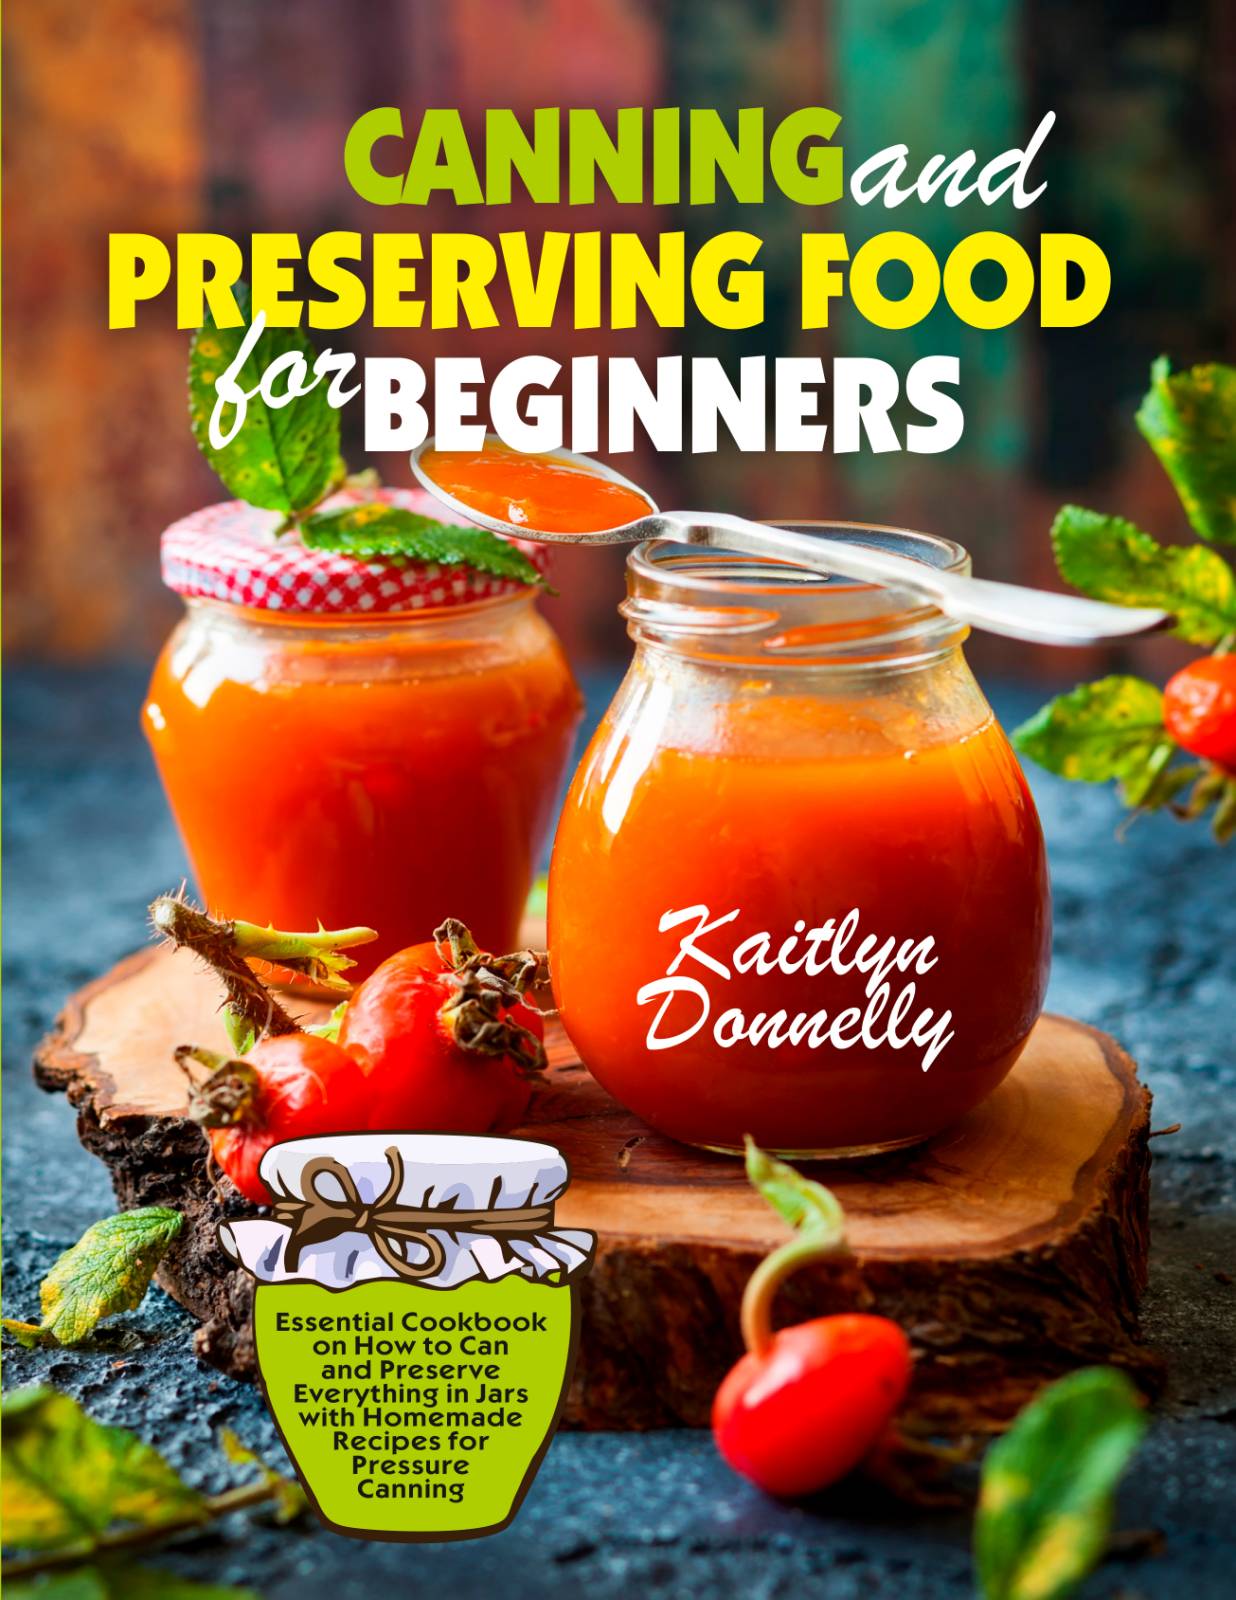 FREE: Canning and Preserving Food for Beginners by Kaitlyn Donnelly